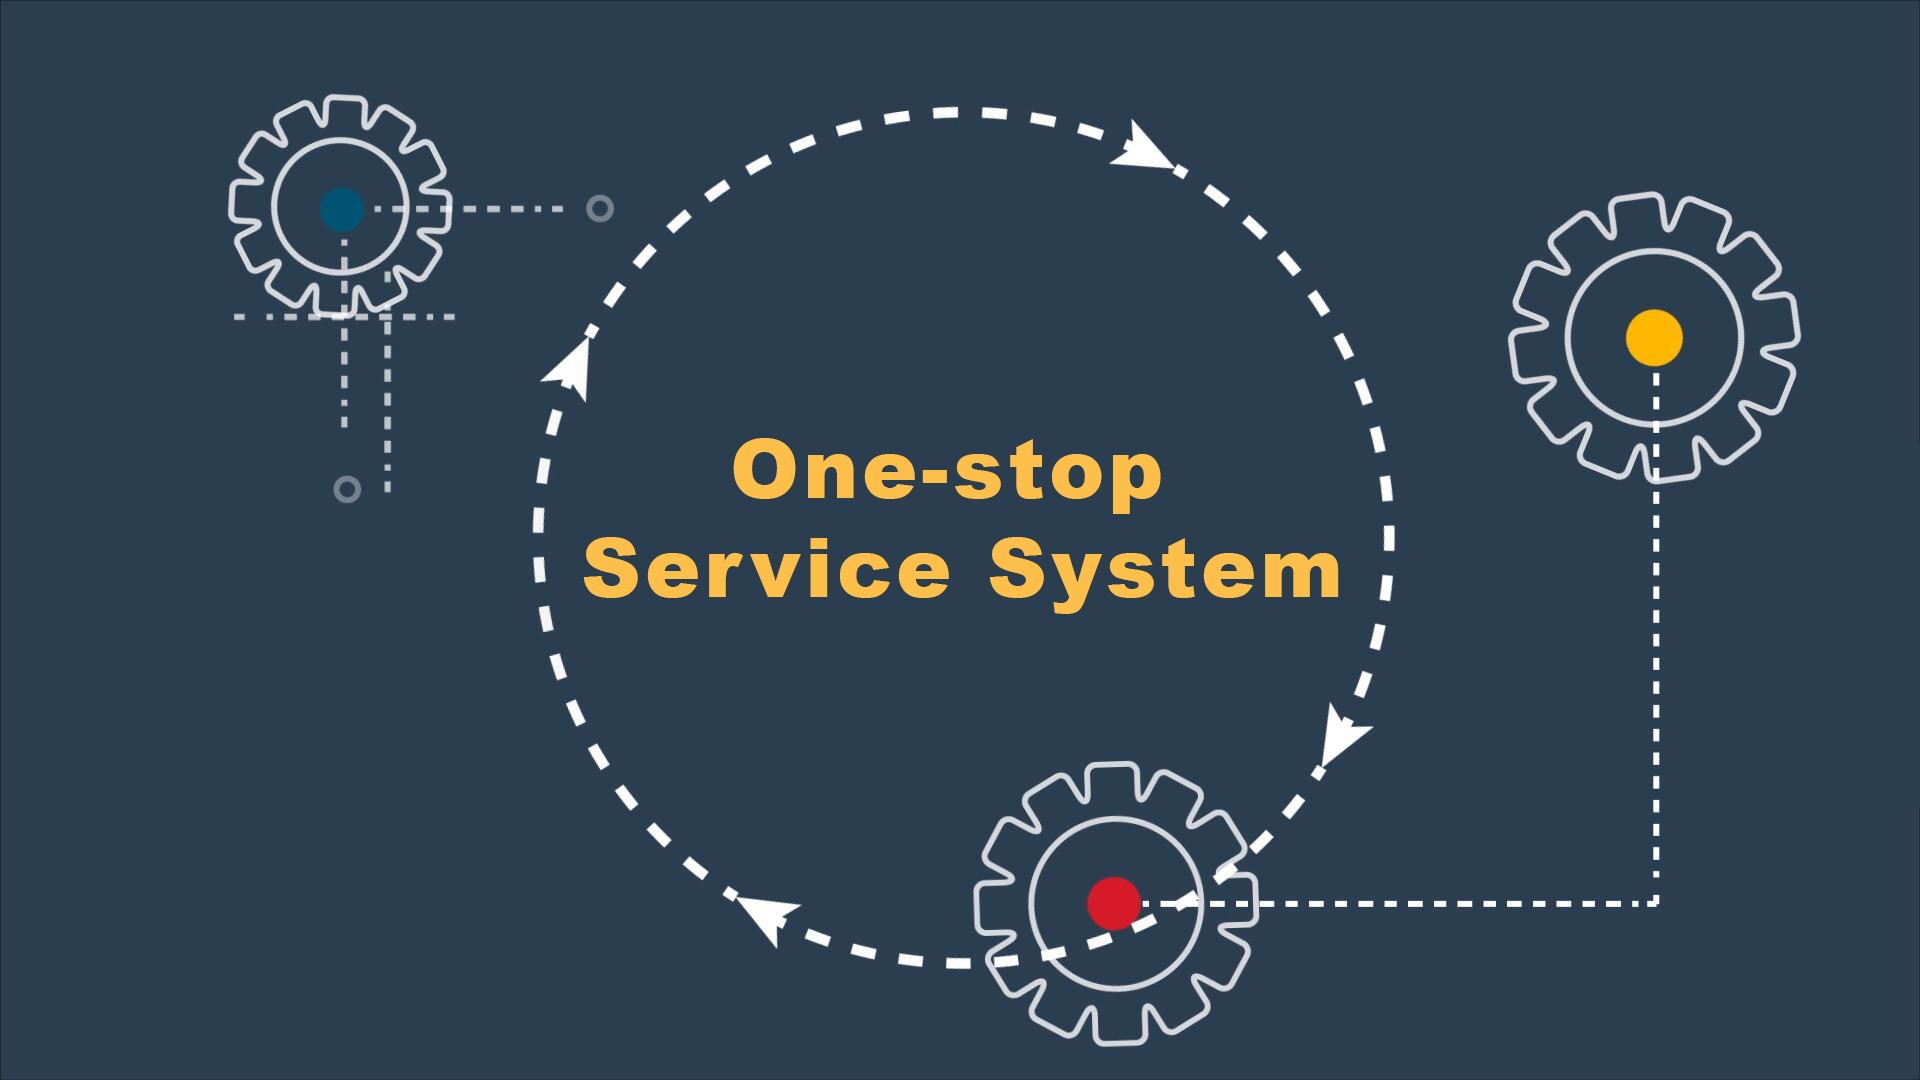 One-stop Service System